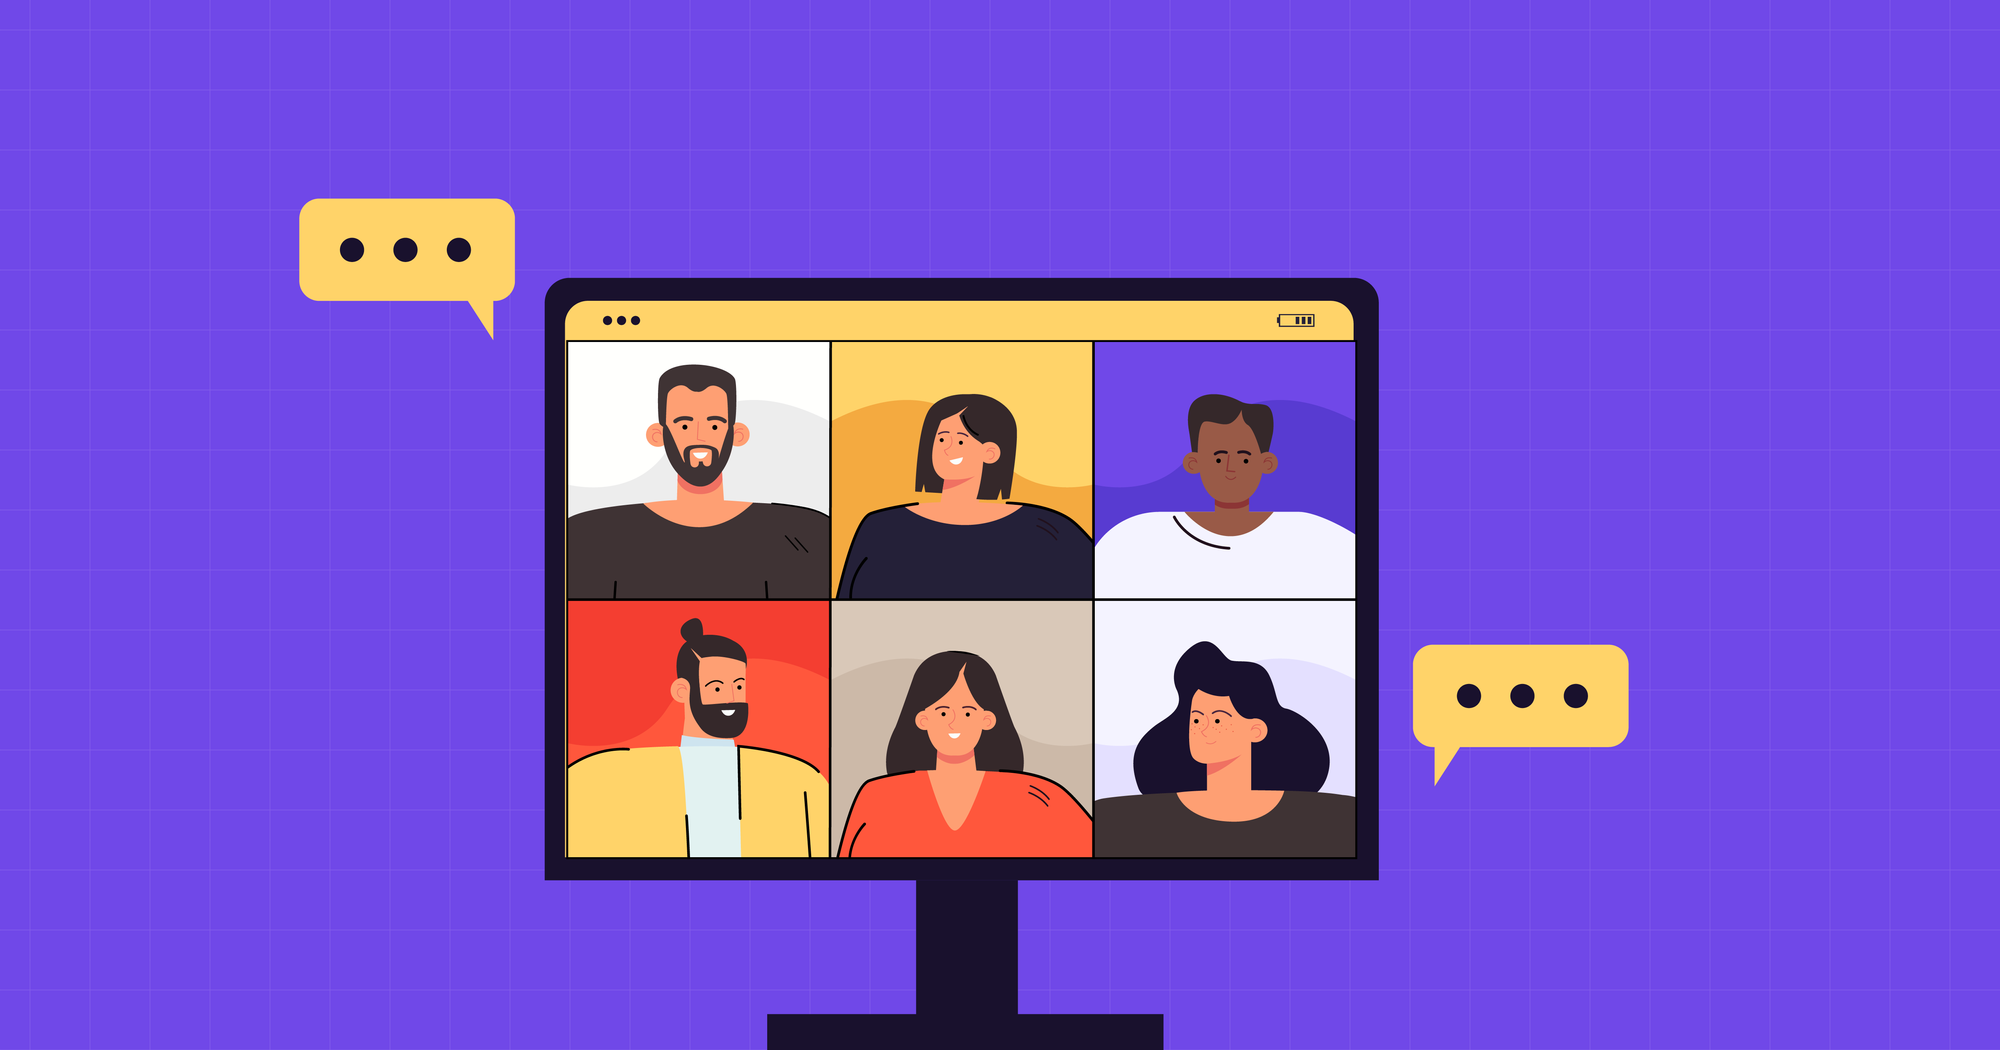 10 virtual team building activities you can implement in your remote team